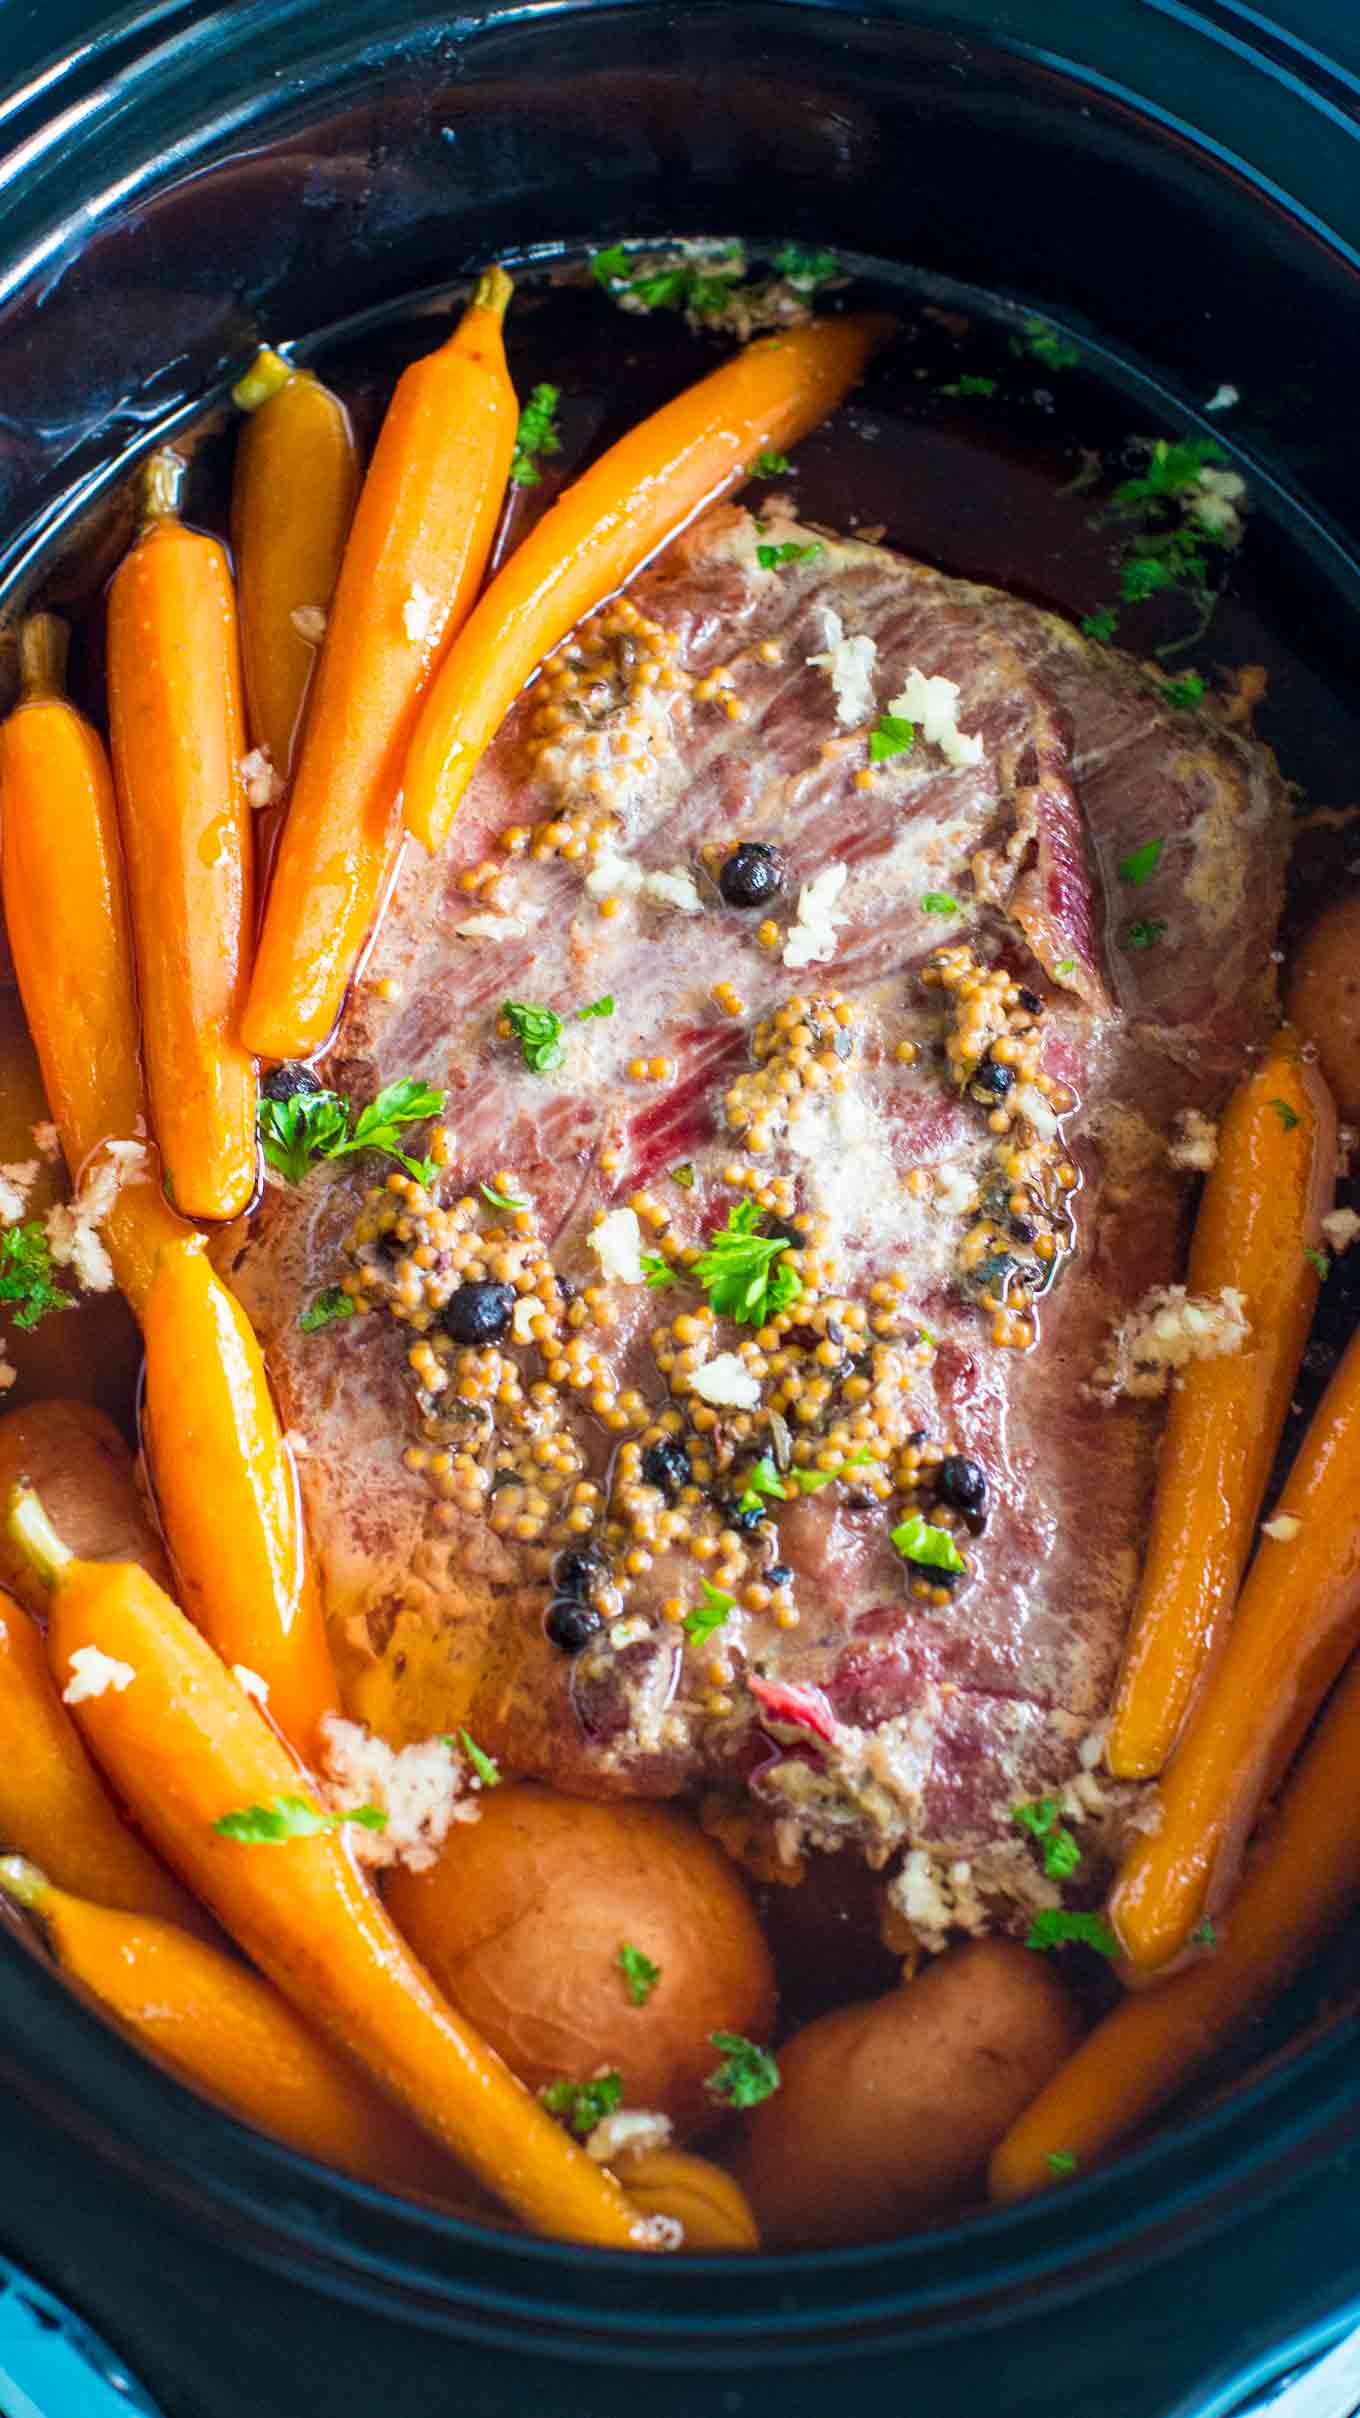 Corned Beef Brisket Delicious Family Meal Made Easy